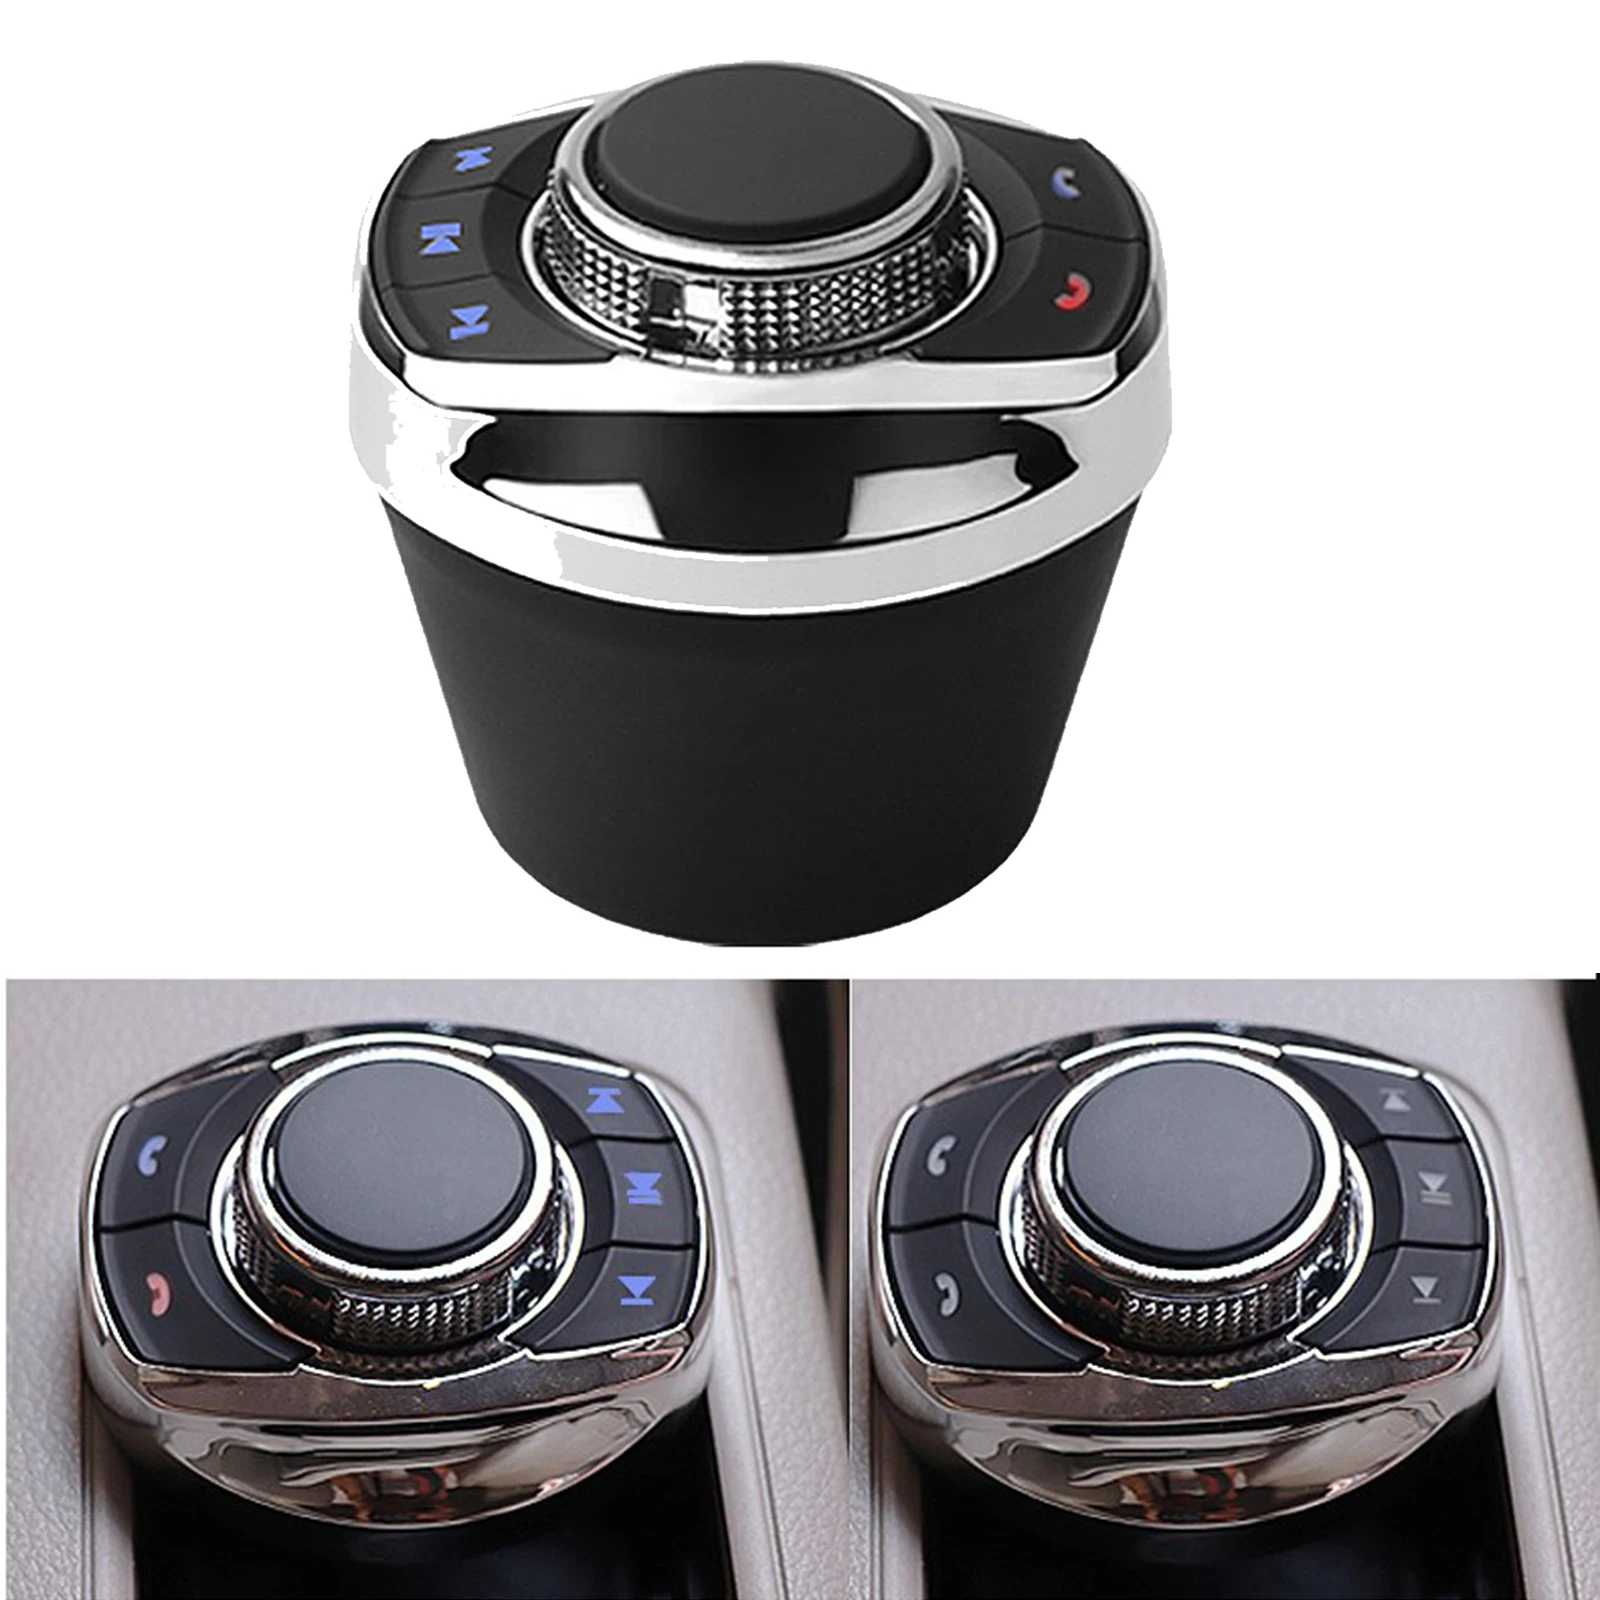 Car Wireless Steering Wheel Control Button Cup Shape With LED Light 8-Key Functions For Car Android Navigation Player